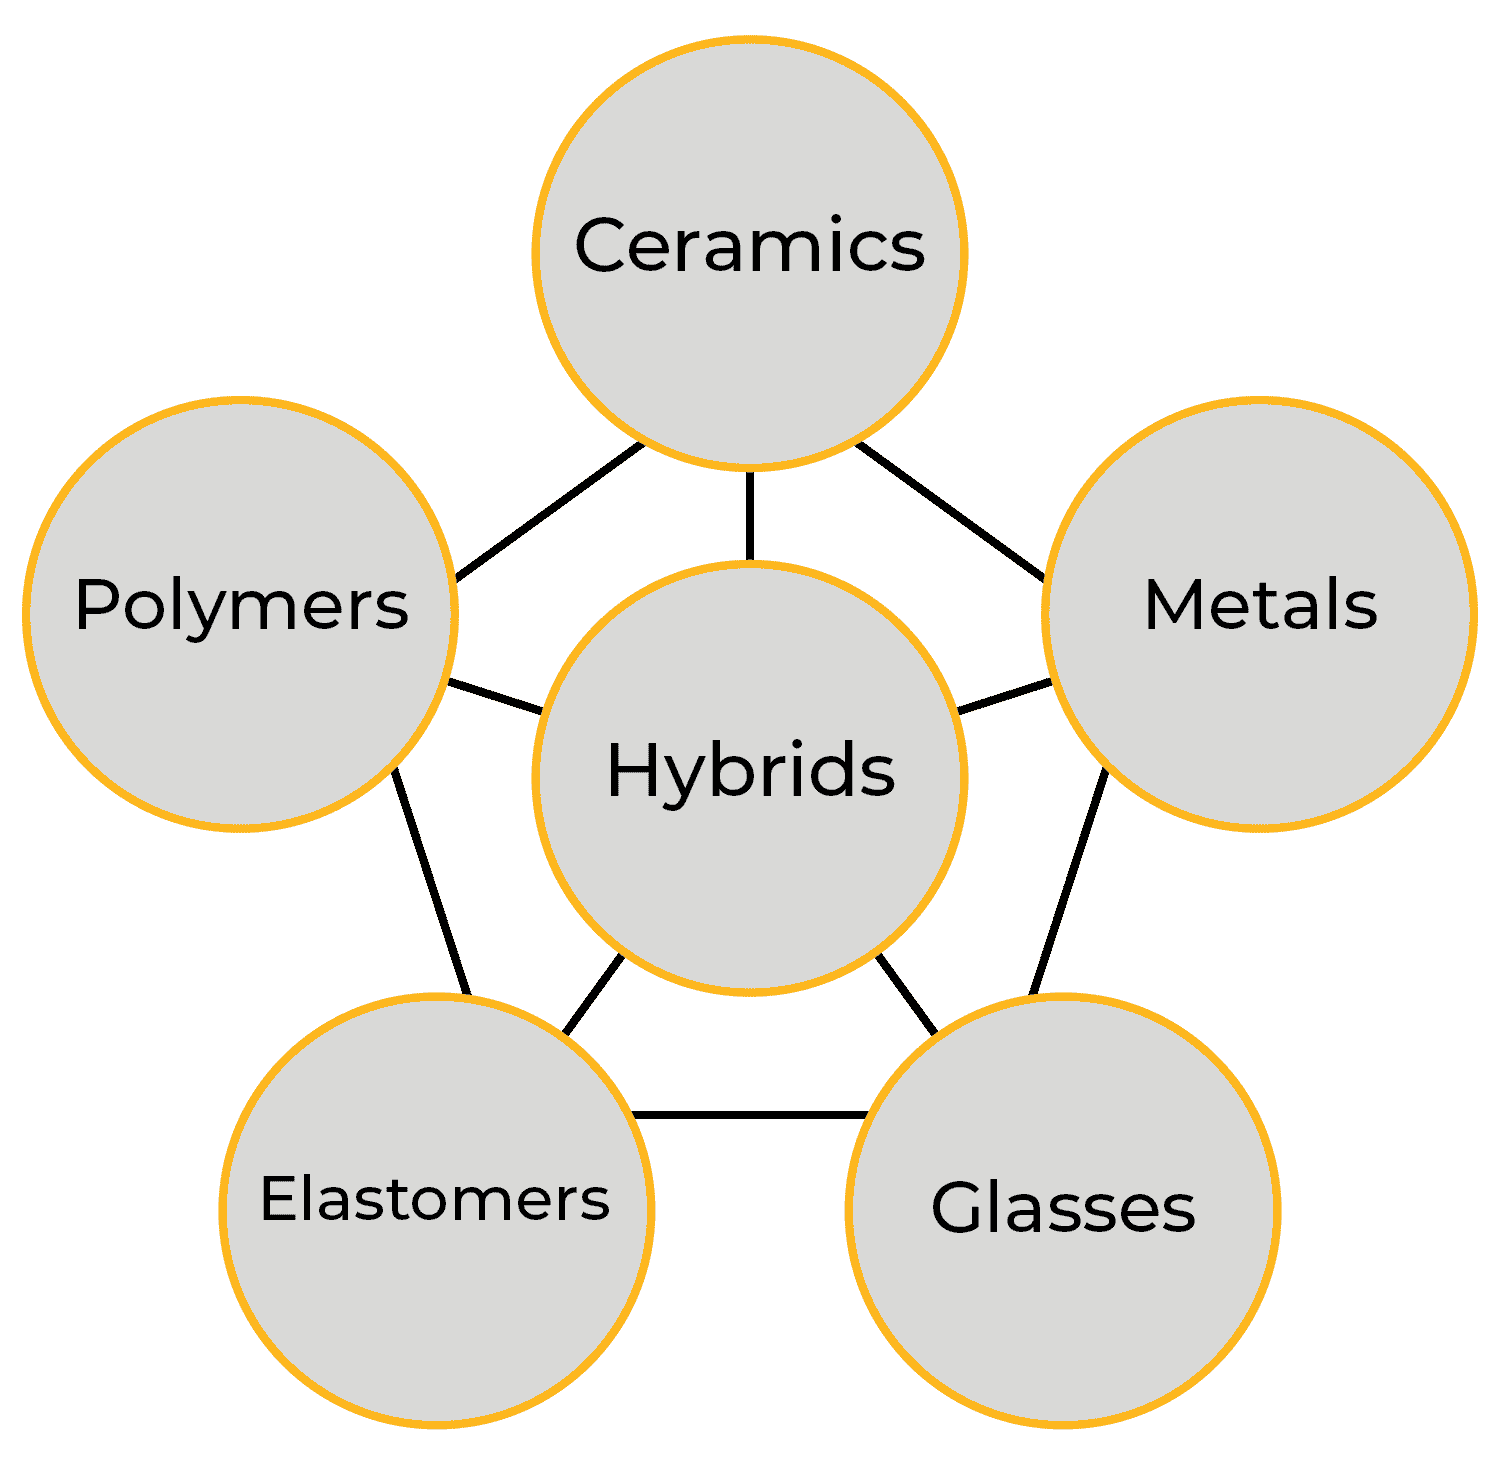 6 circles labeled with material families: ceramics, metals, glasses, elastomers, polymers, and hybrids